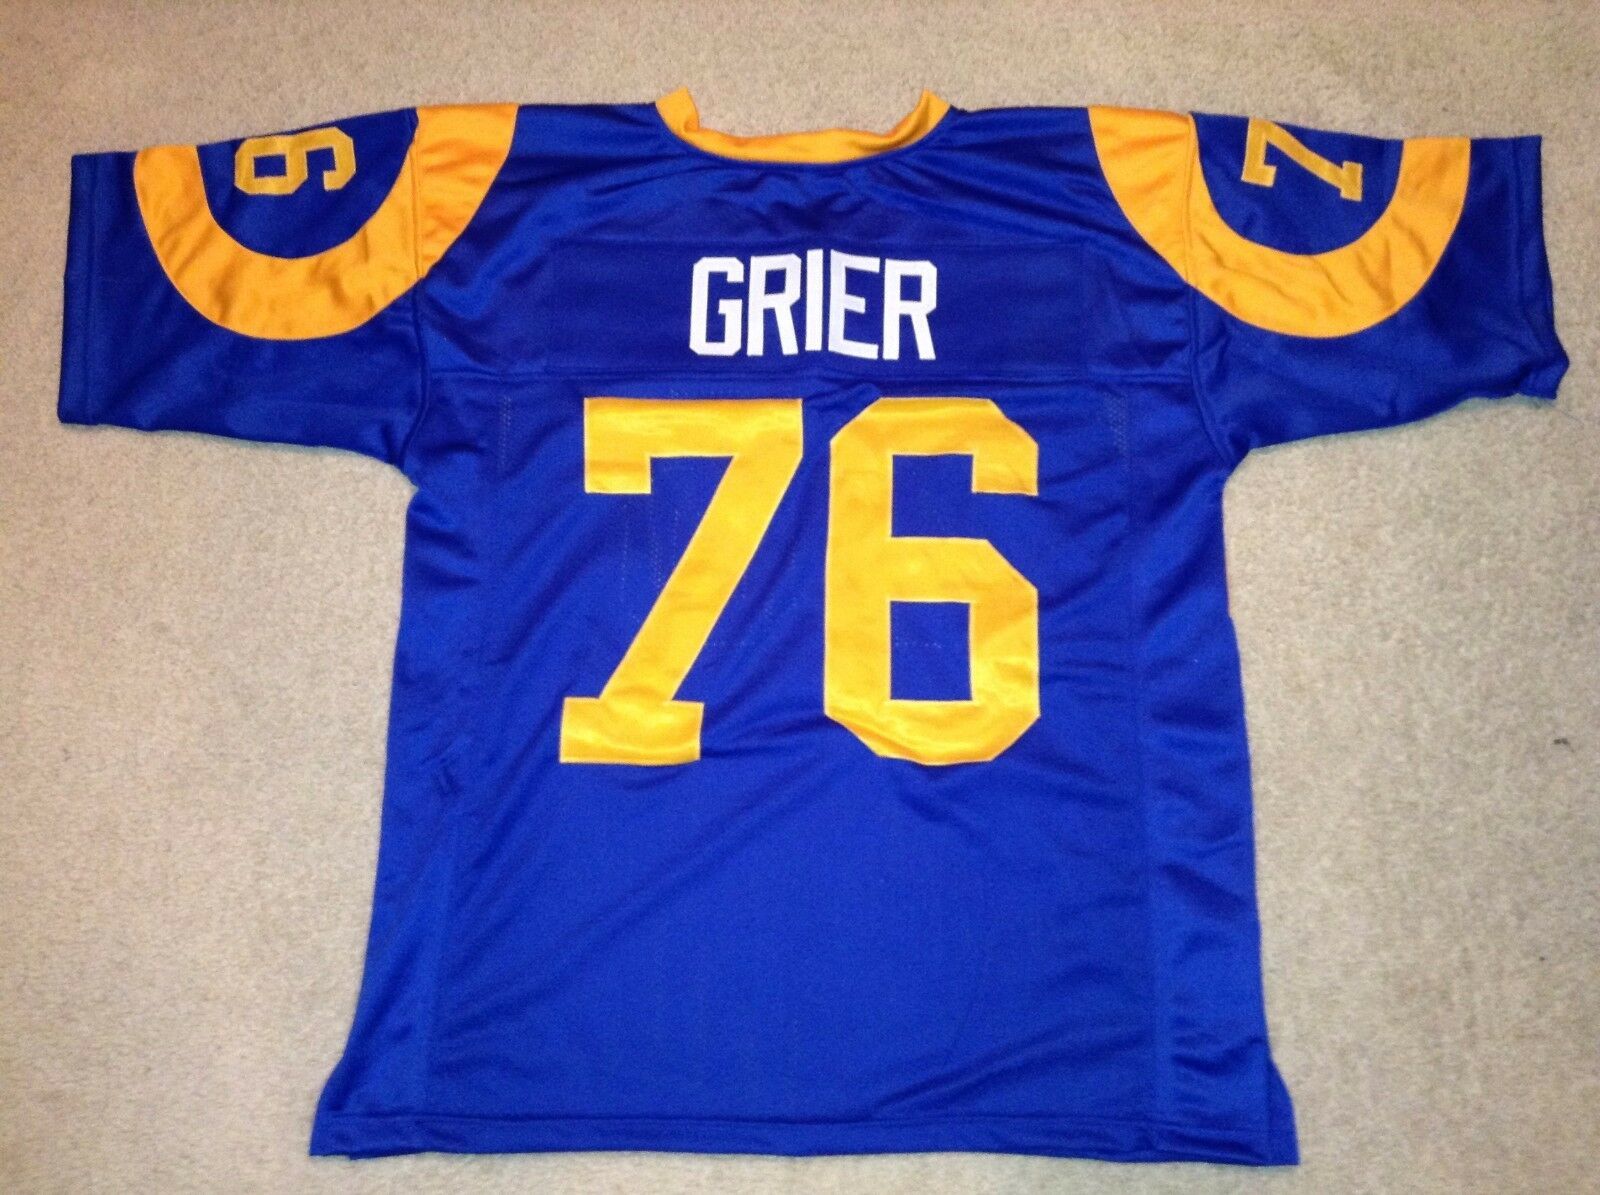 UNSIGNED CUSTOM Sewn Stitched Rosey Grier Blue Jersey - M, L, XL, 2XL - Football-NFL